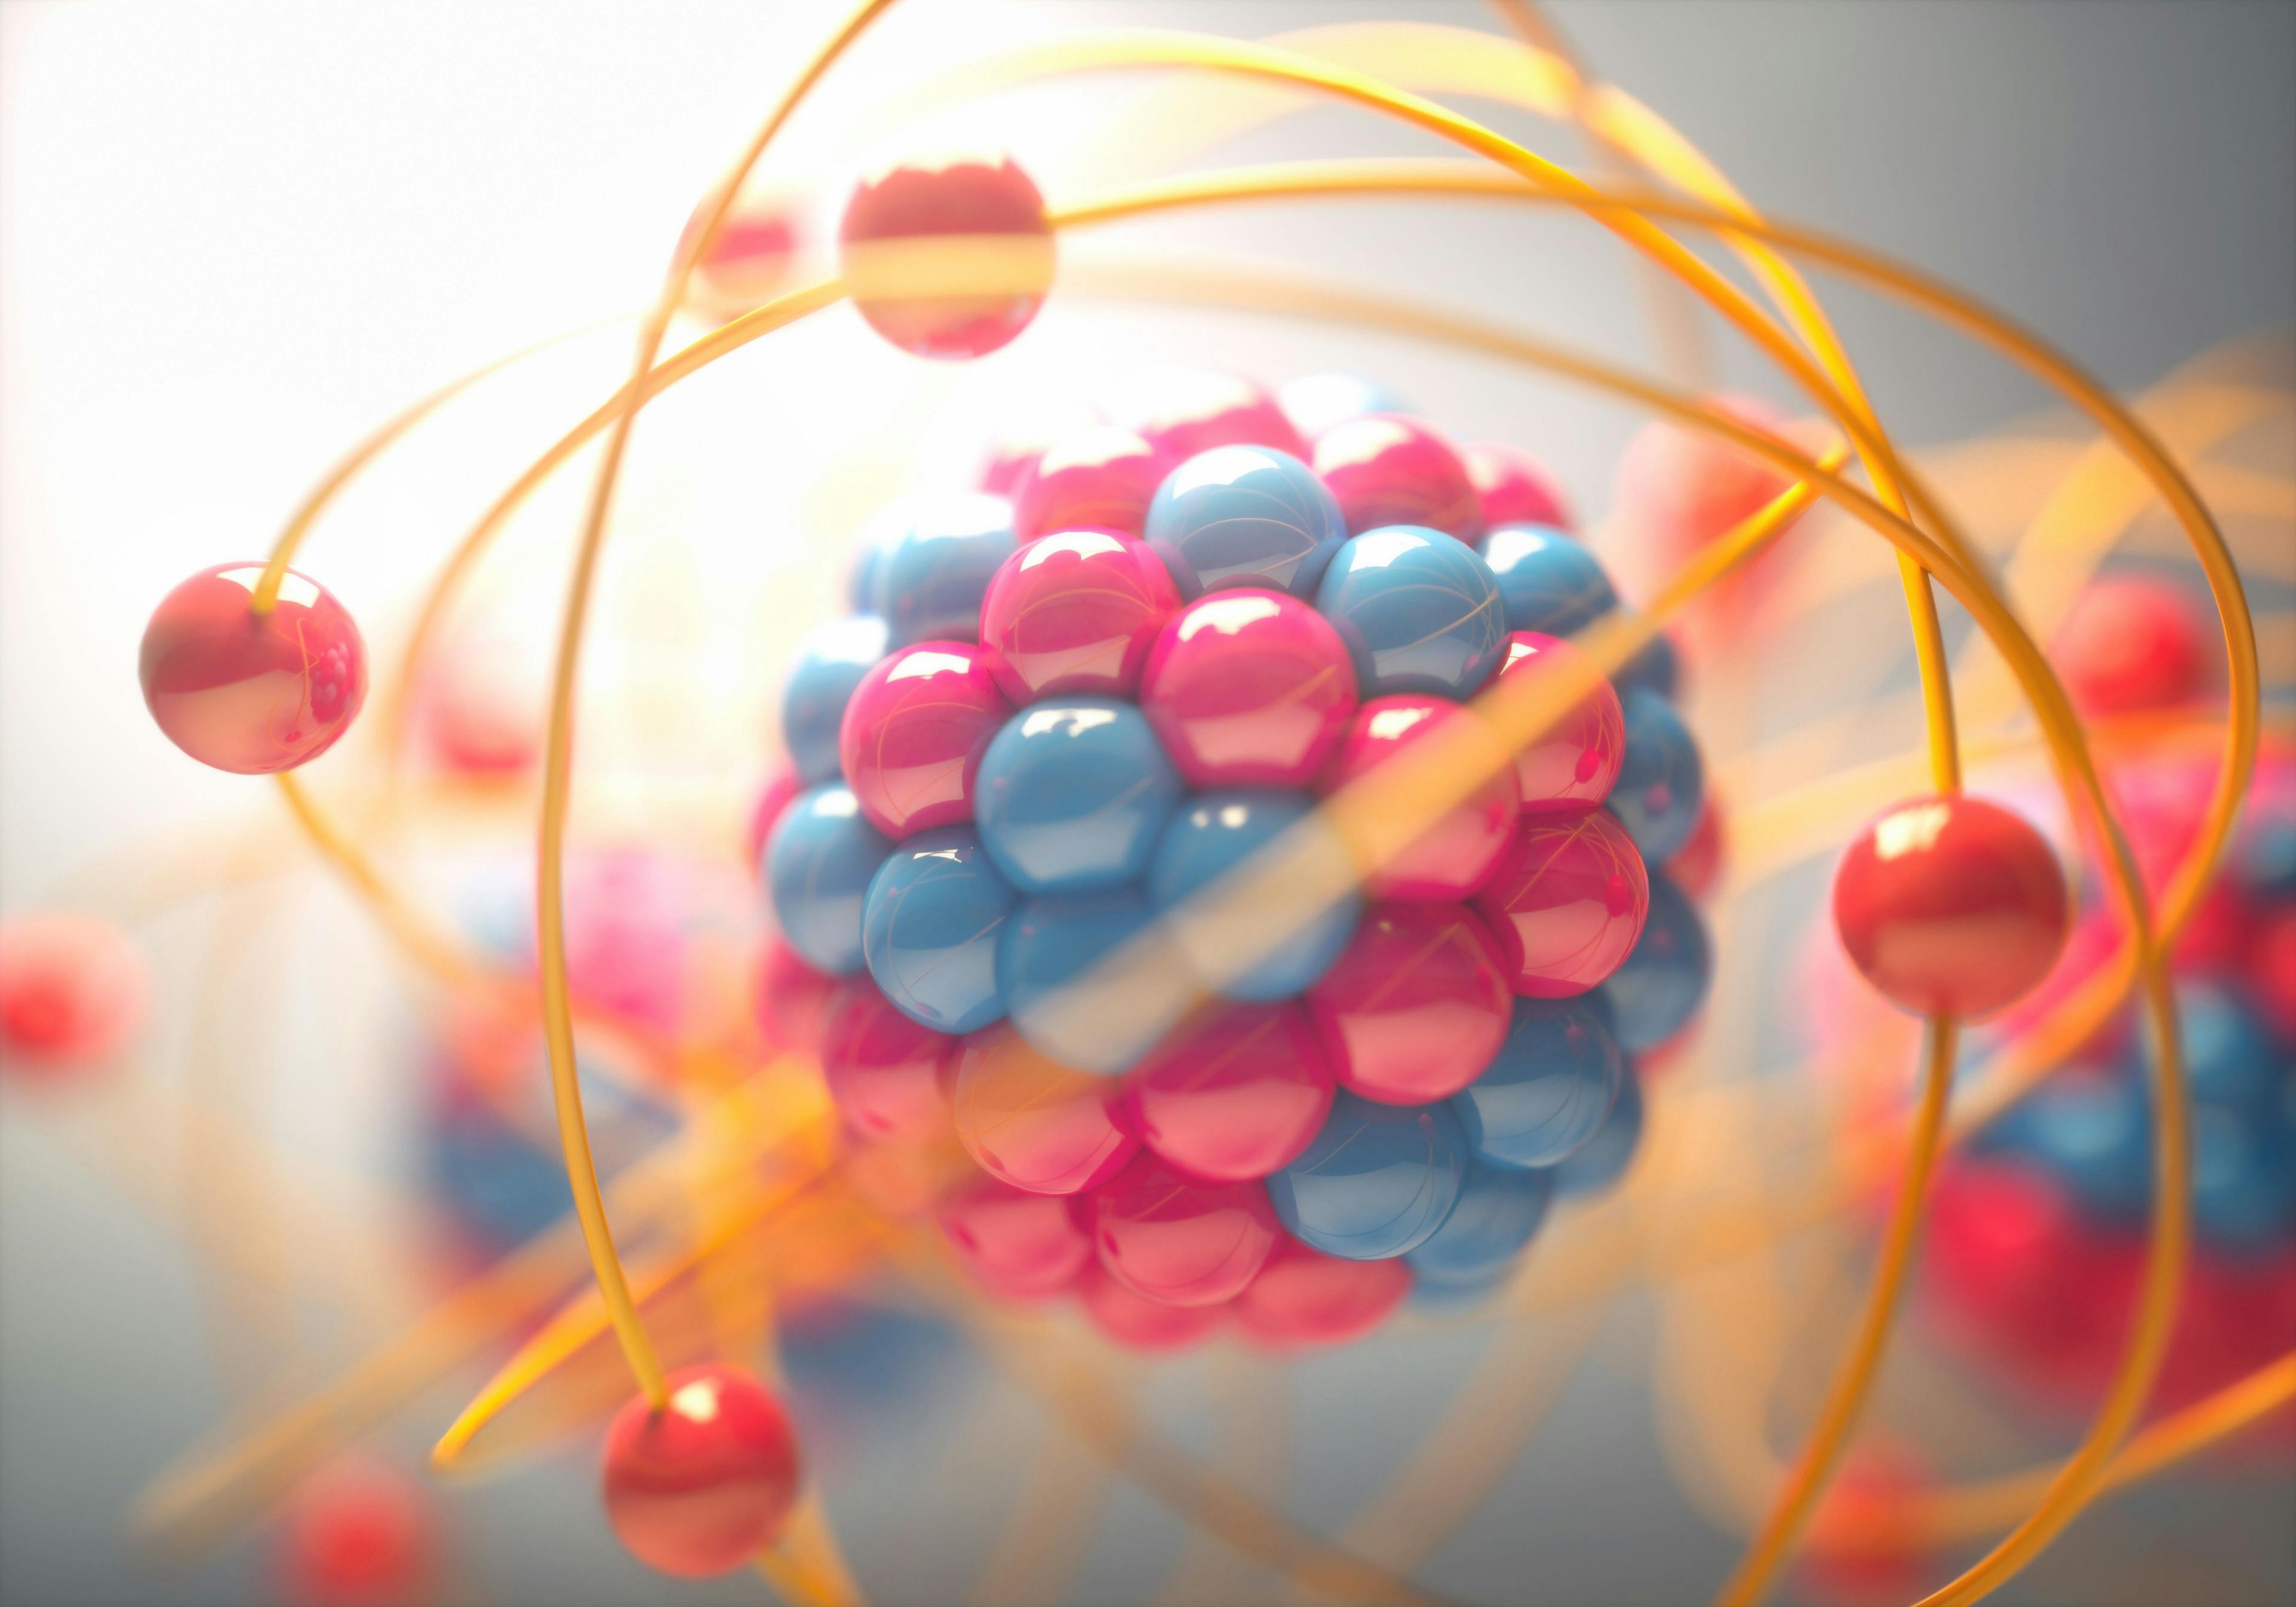 Atom, the smallest constituent unit of ordinary matter that has the properties of a chemical element. | Image Credit: © ktsdesign - stock.adobe.com